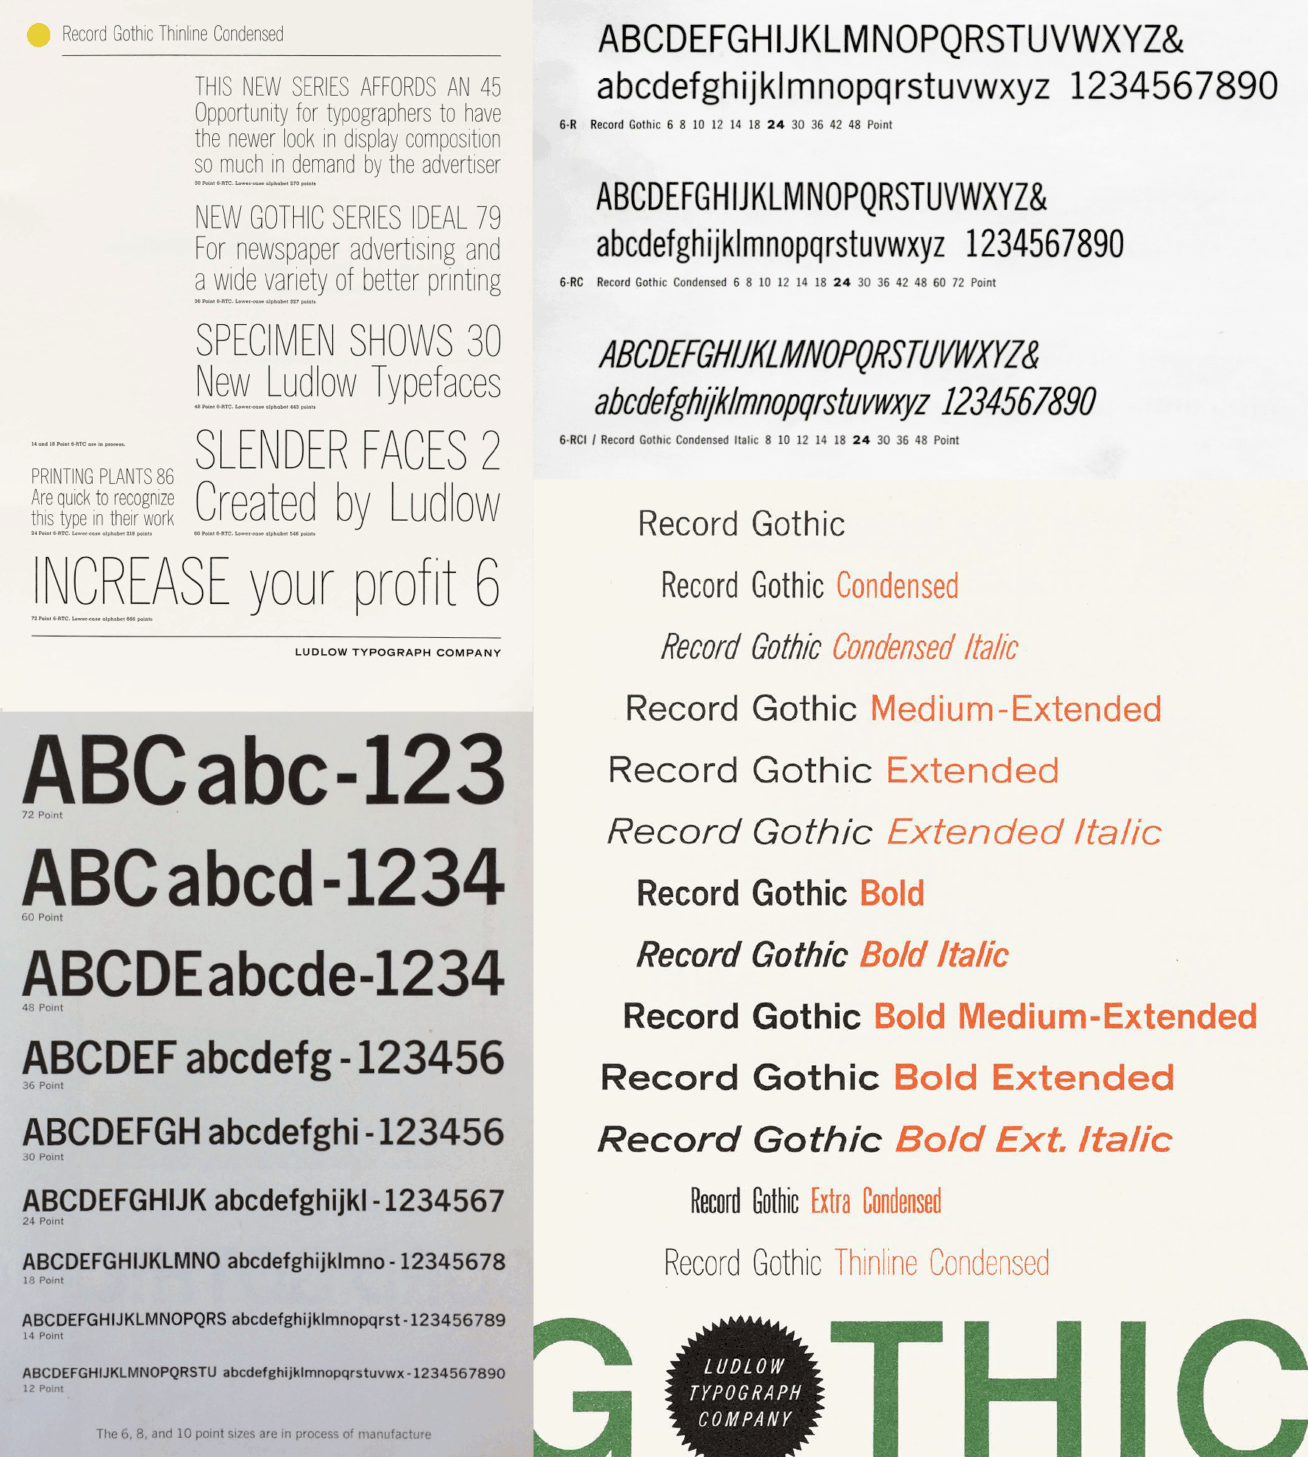 A2 Record Gothic XCondensed